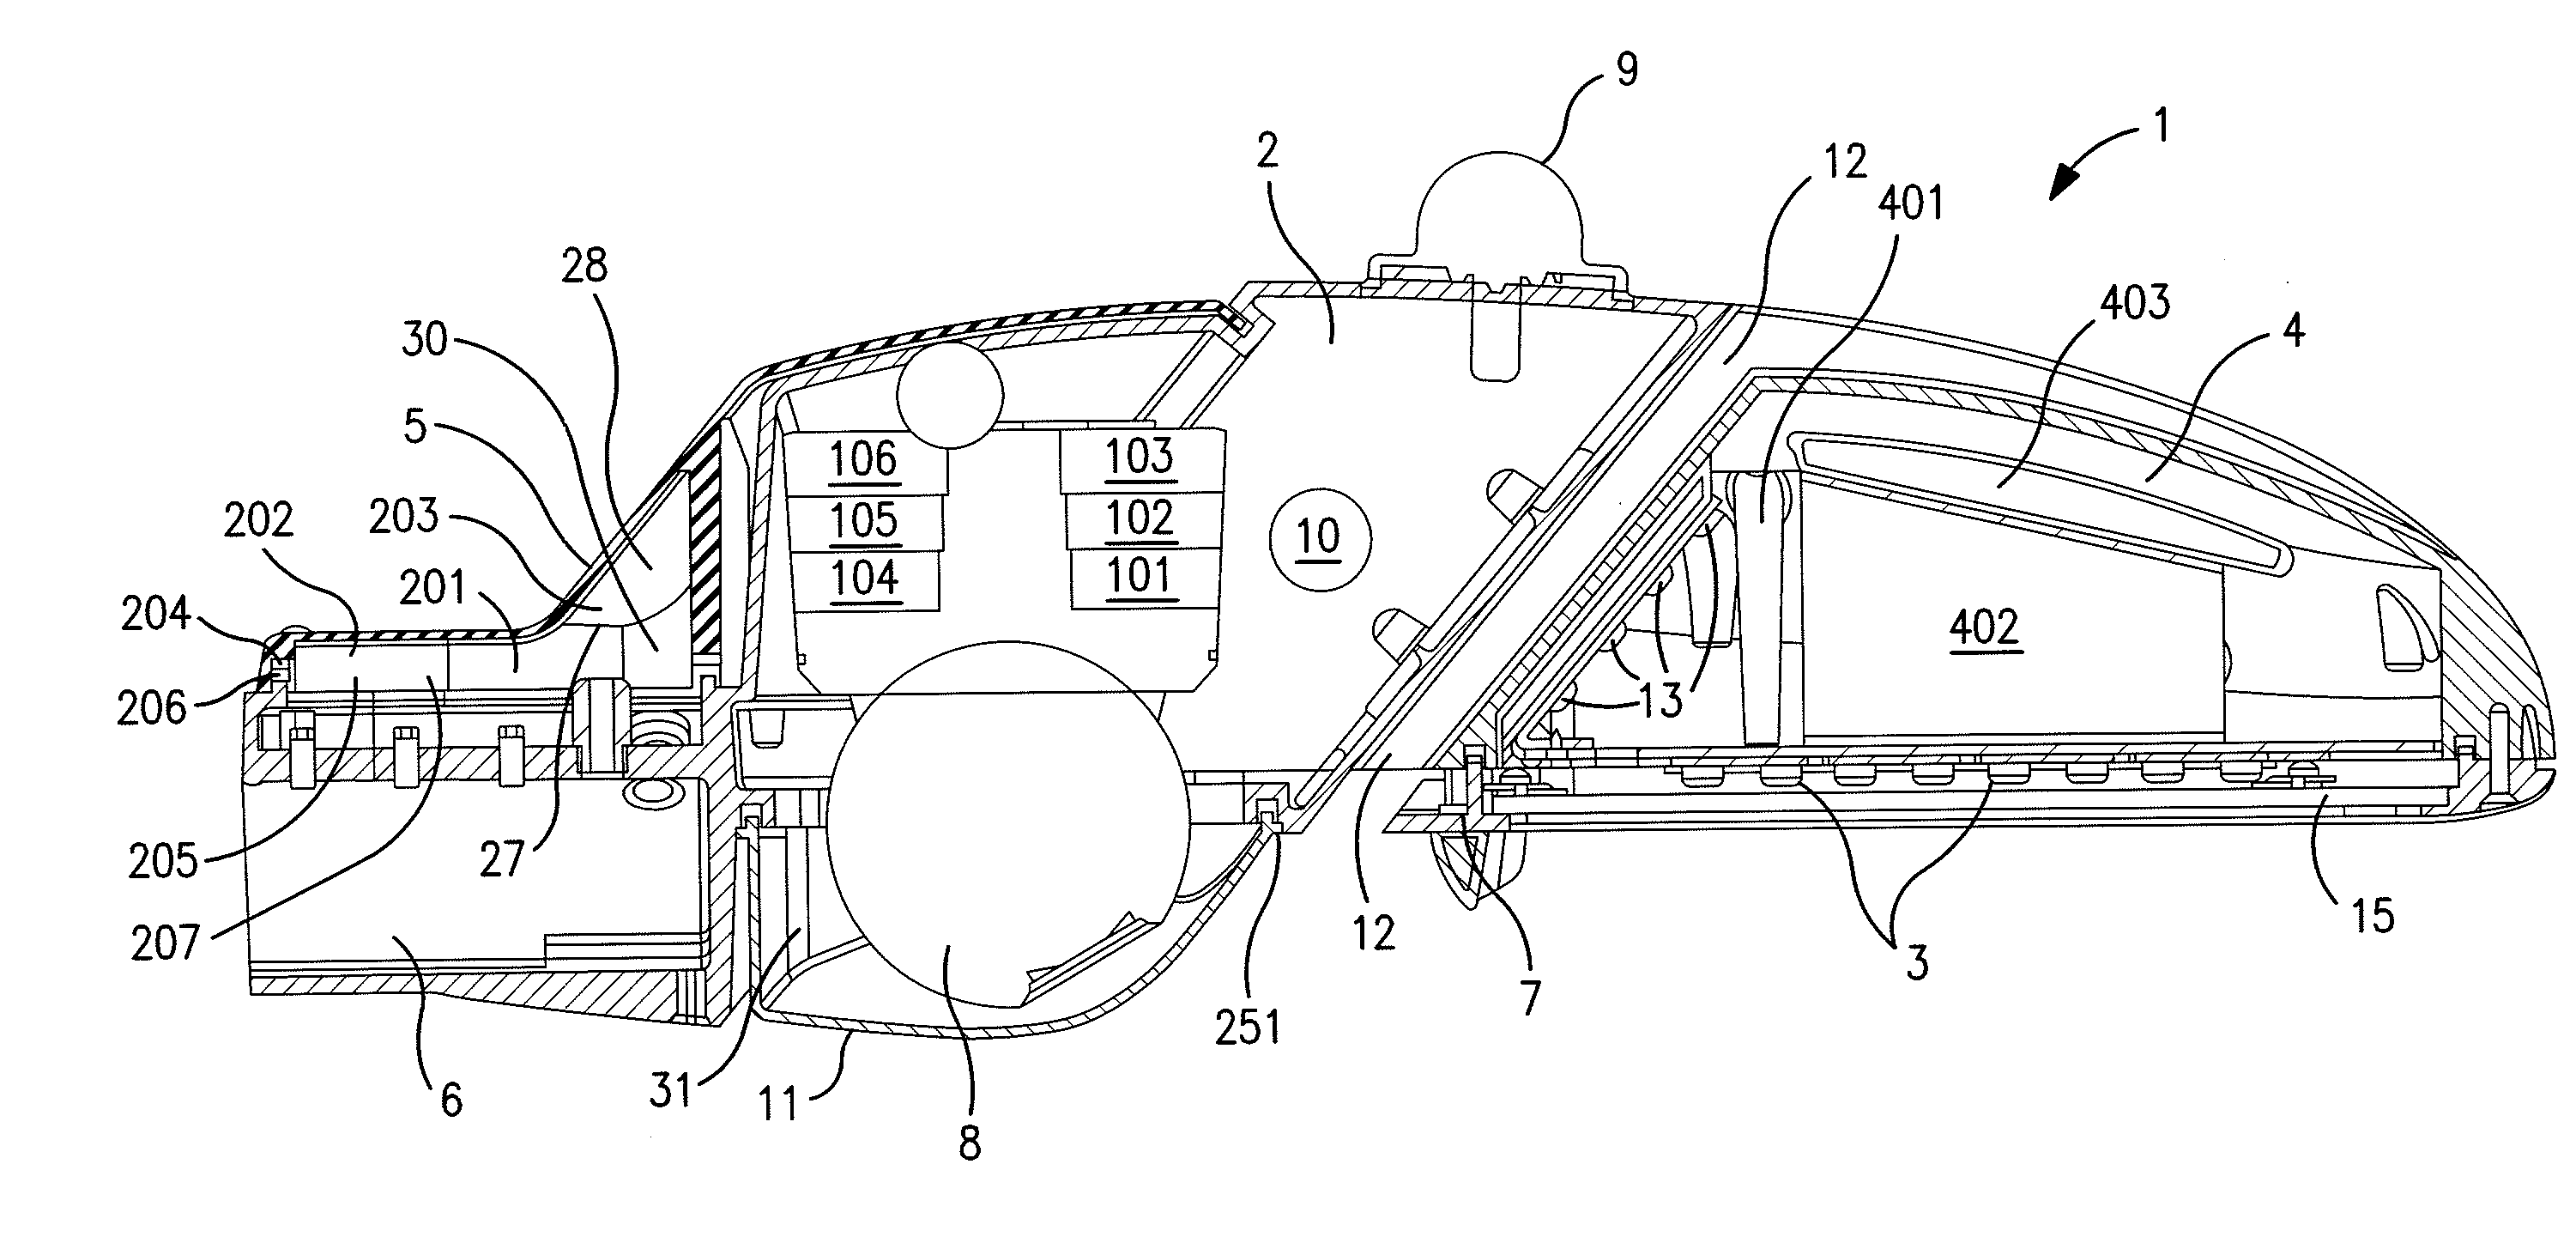 Apparatus and method embedding a camera in an LED streetlight